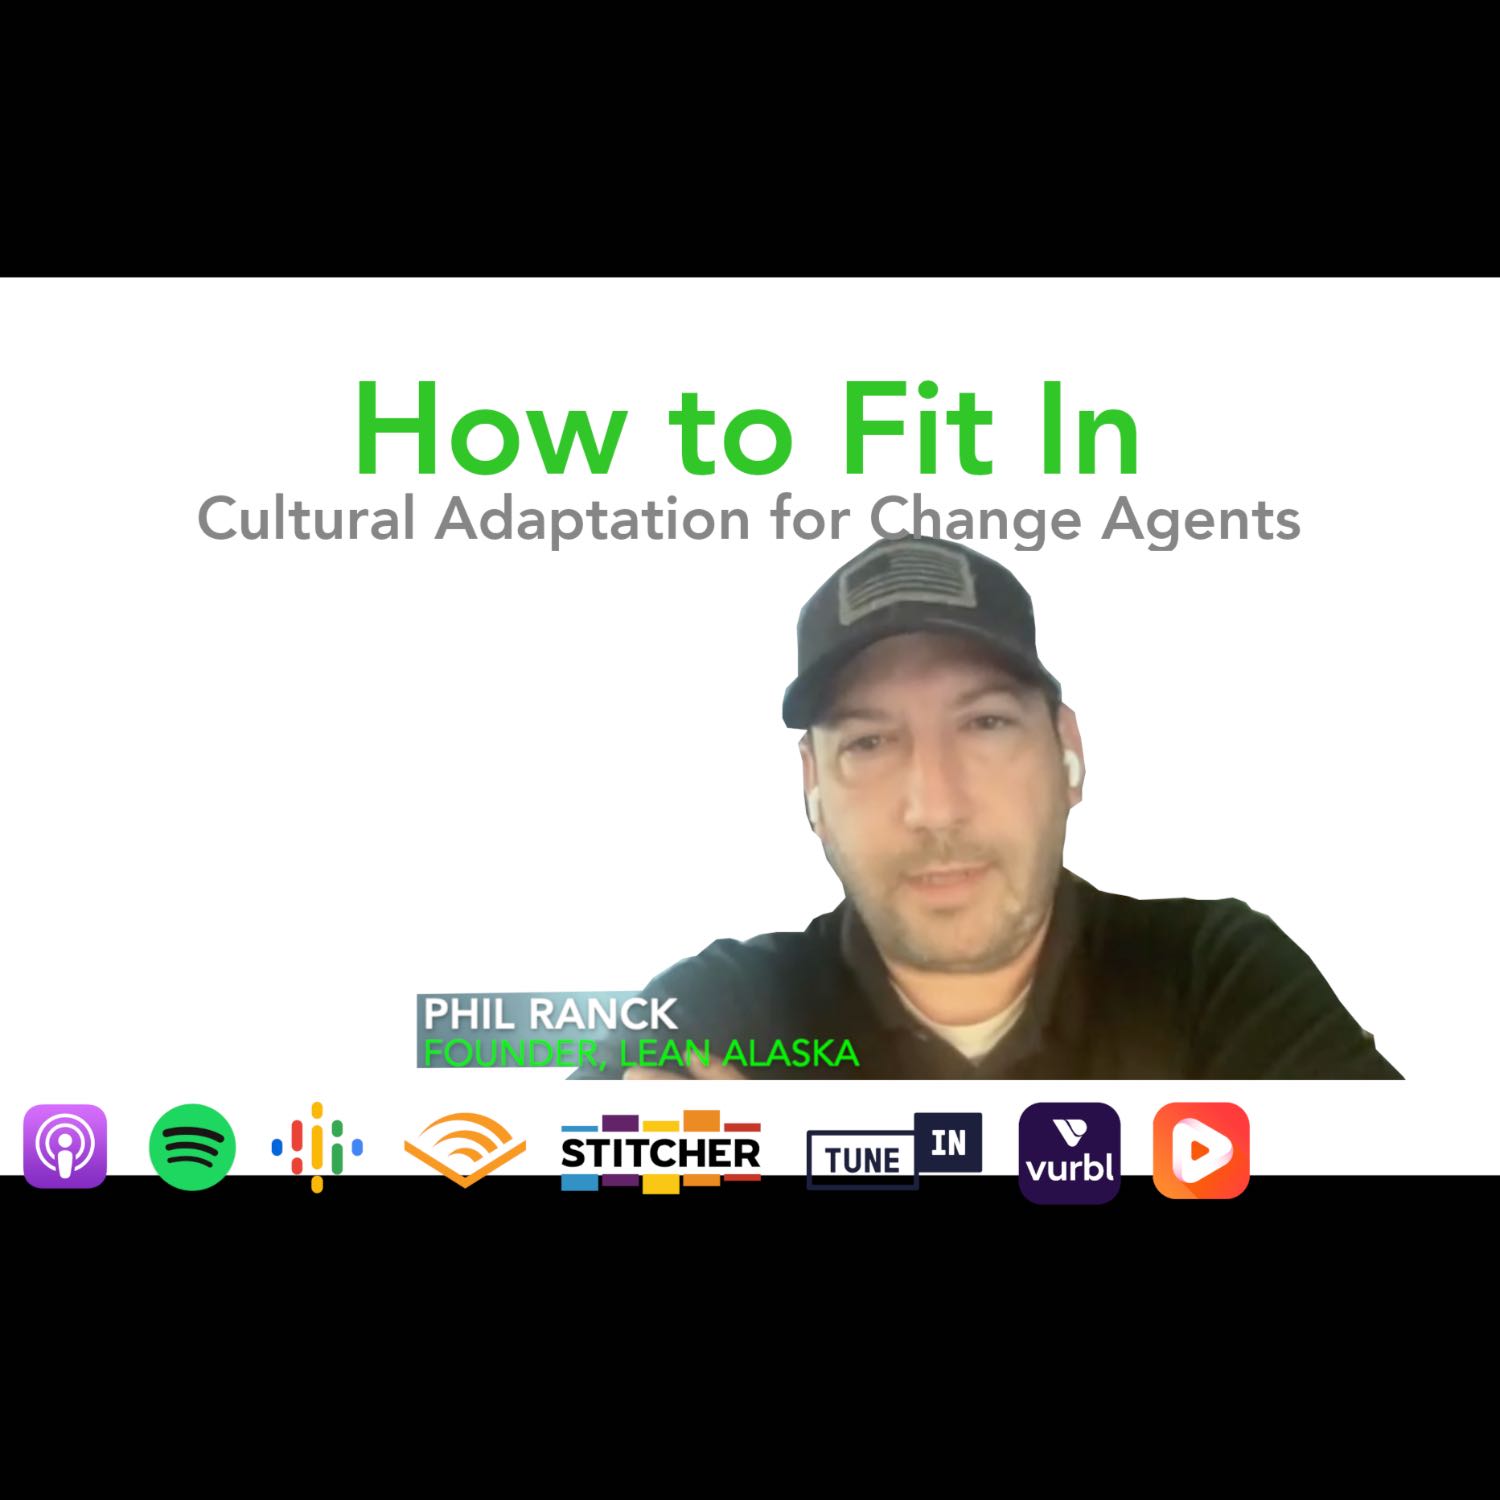 How to Fit In - Cultural Adaptation for Change Agents